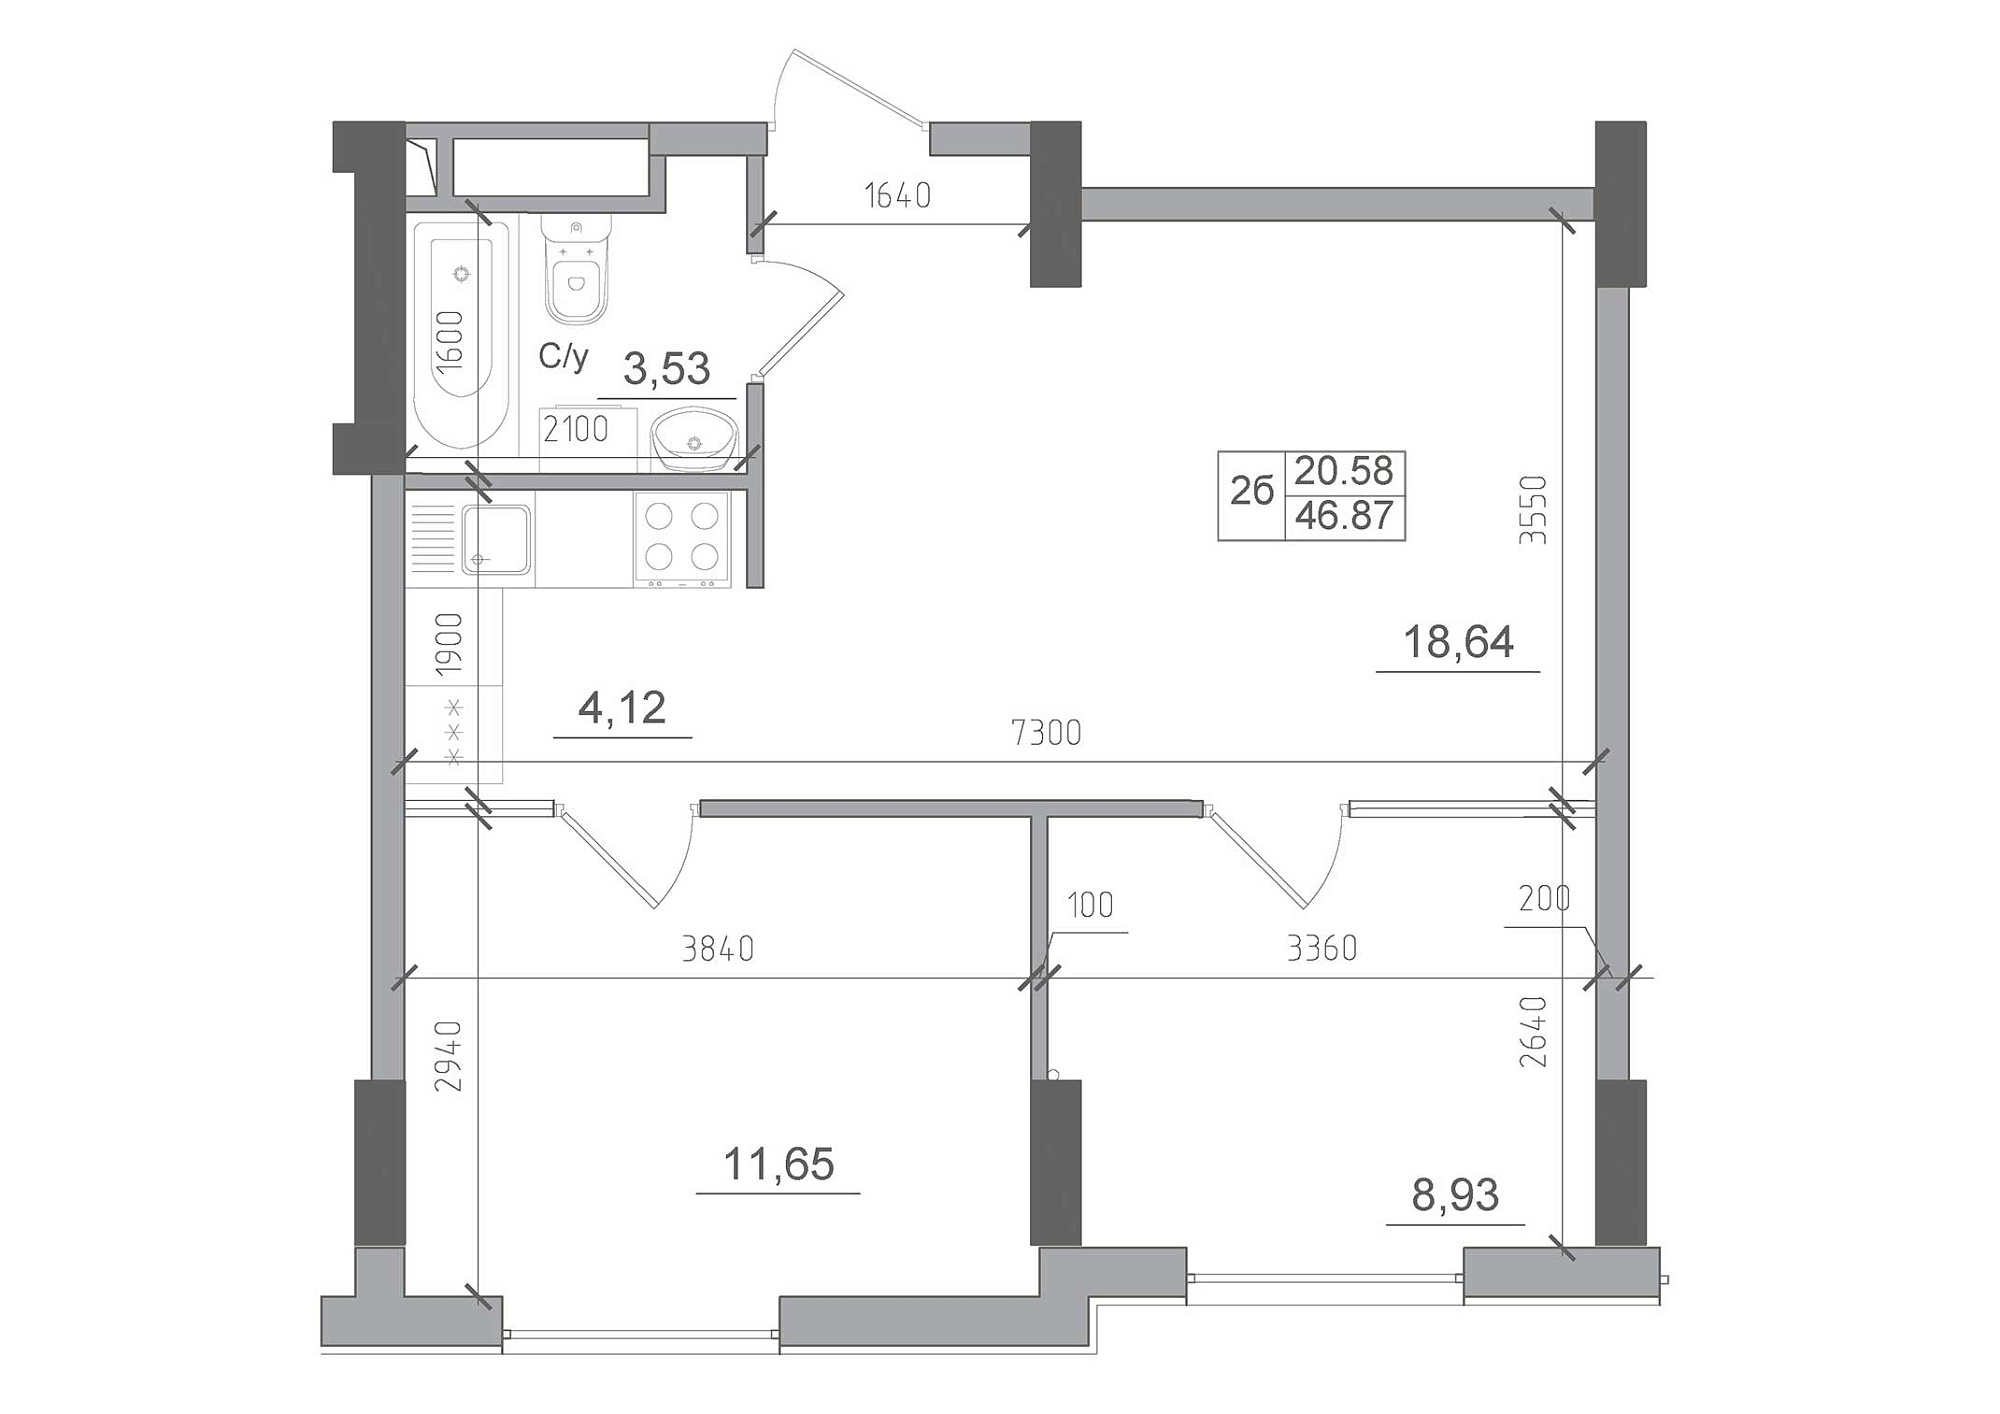 Planning 2-rm flats area 46.87m2, AB-22-04/00008.